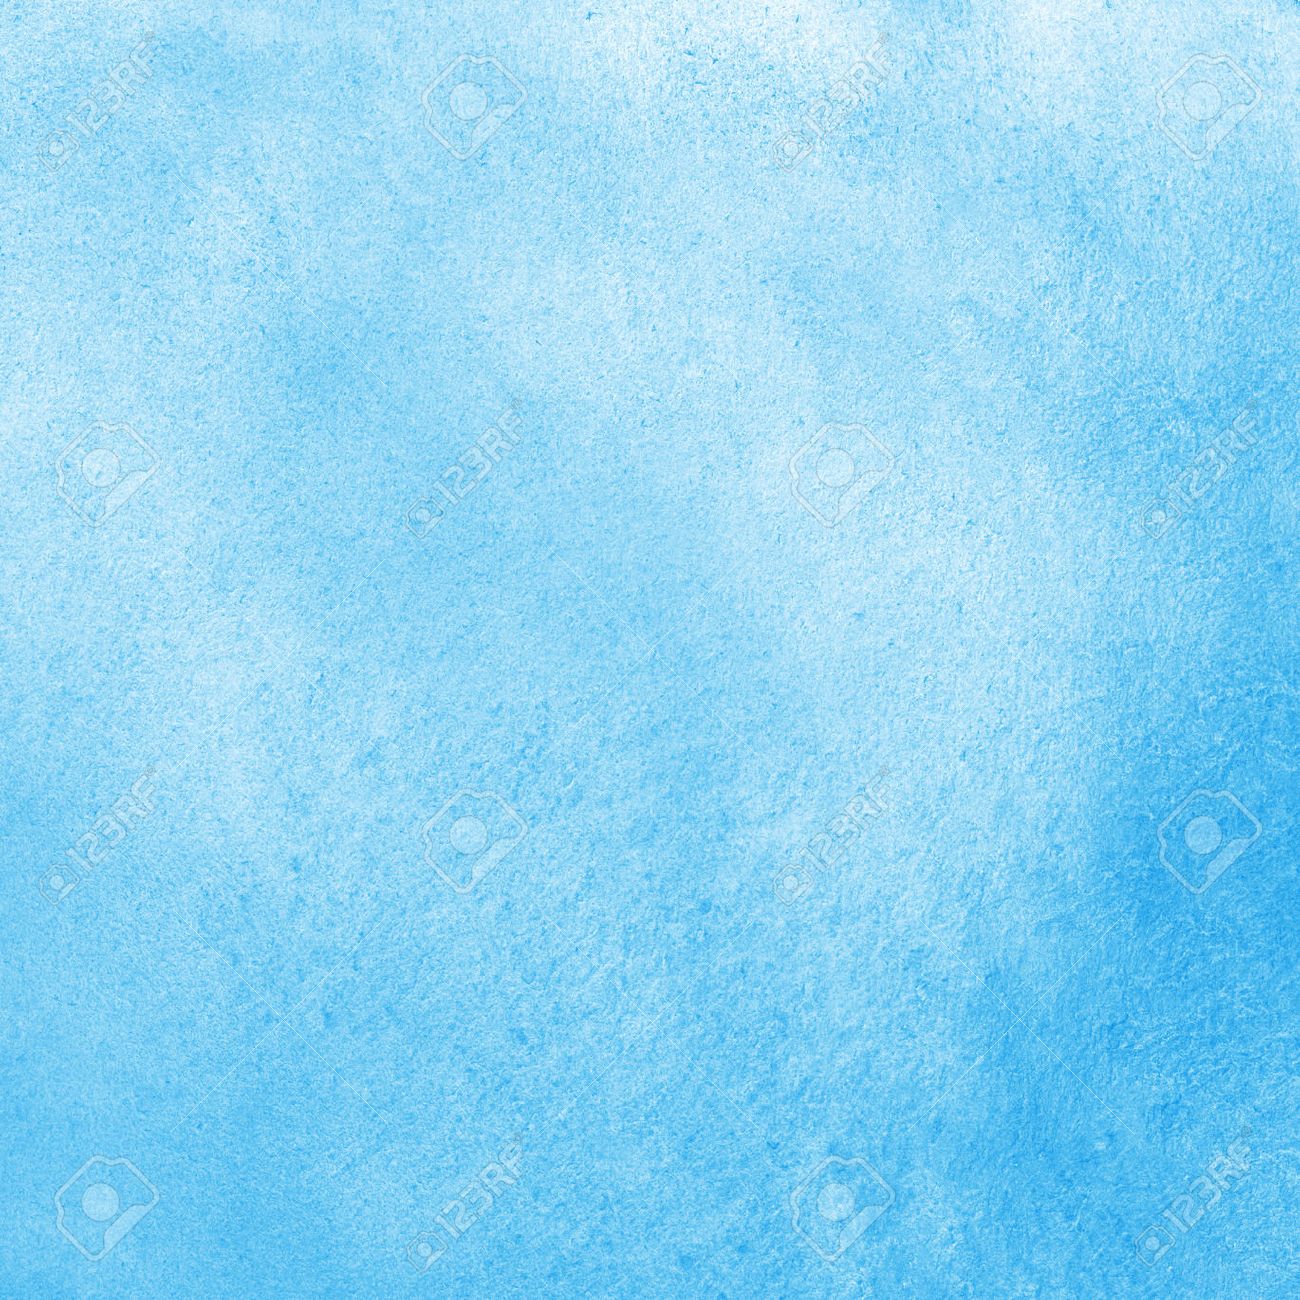 Sky Blue Watercolor Abstract Background Painted Texture With